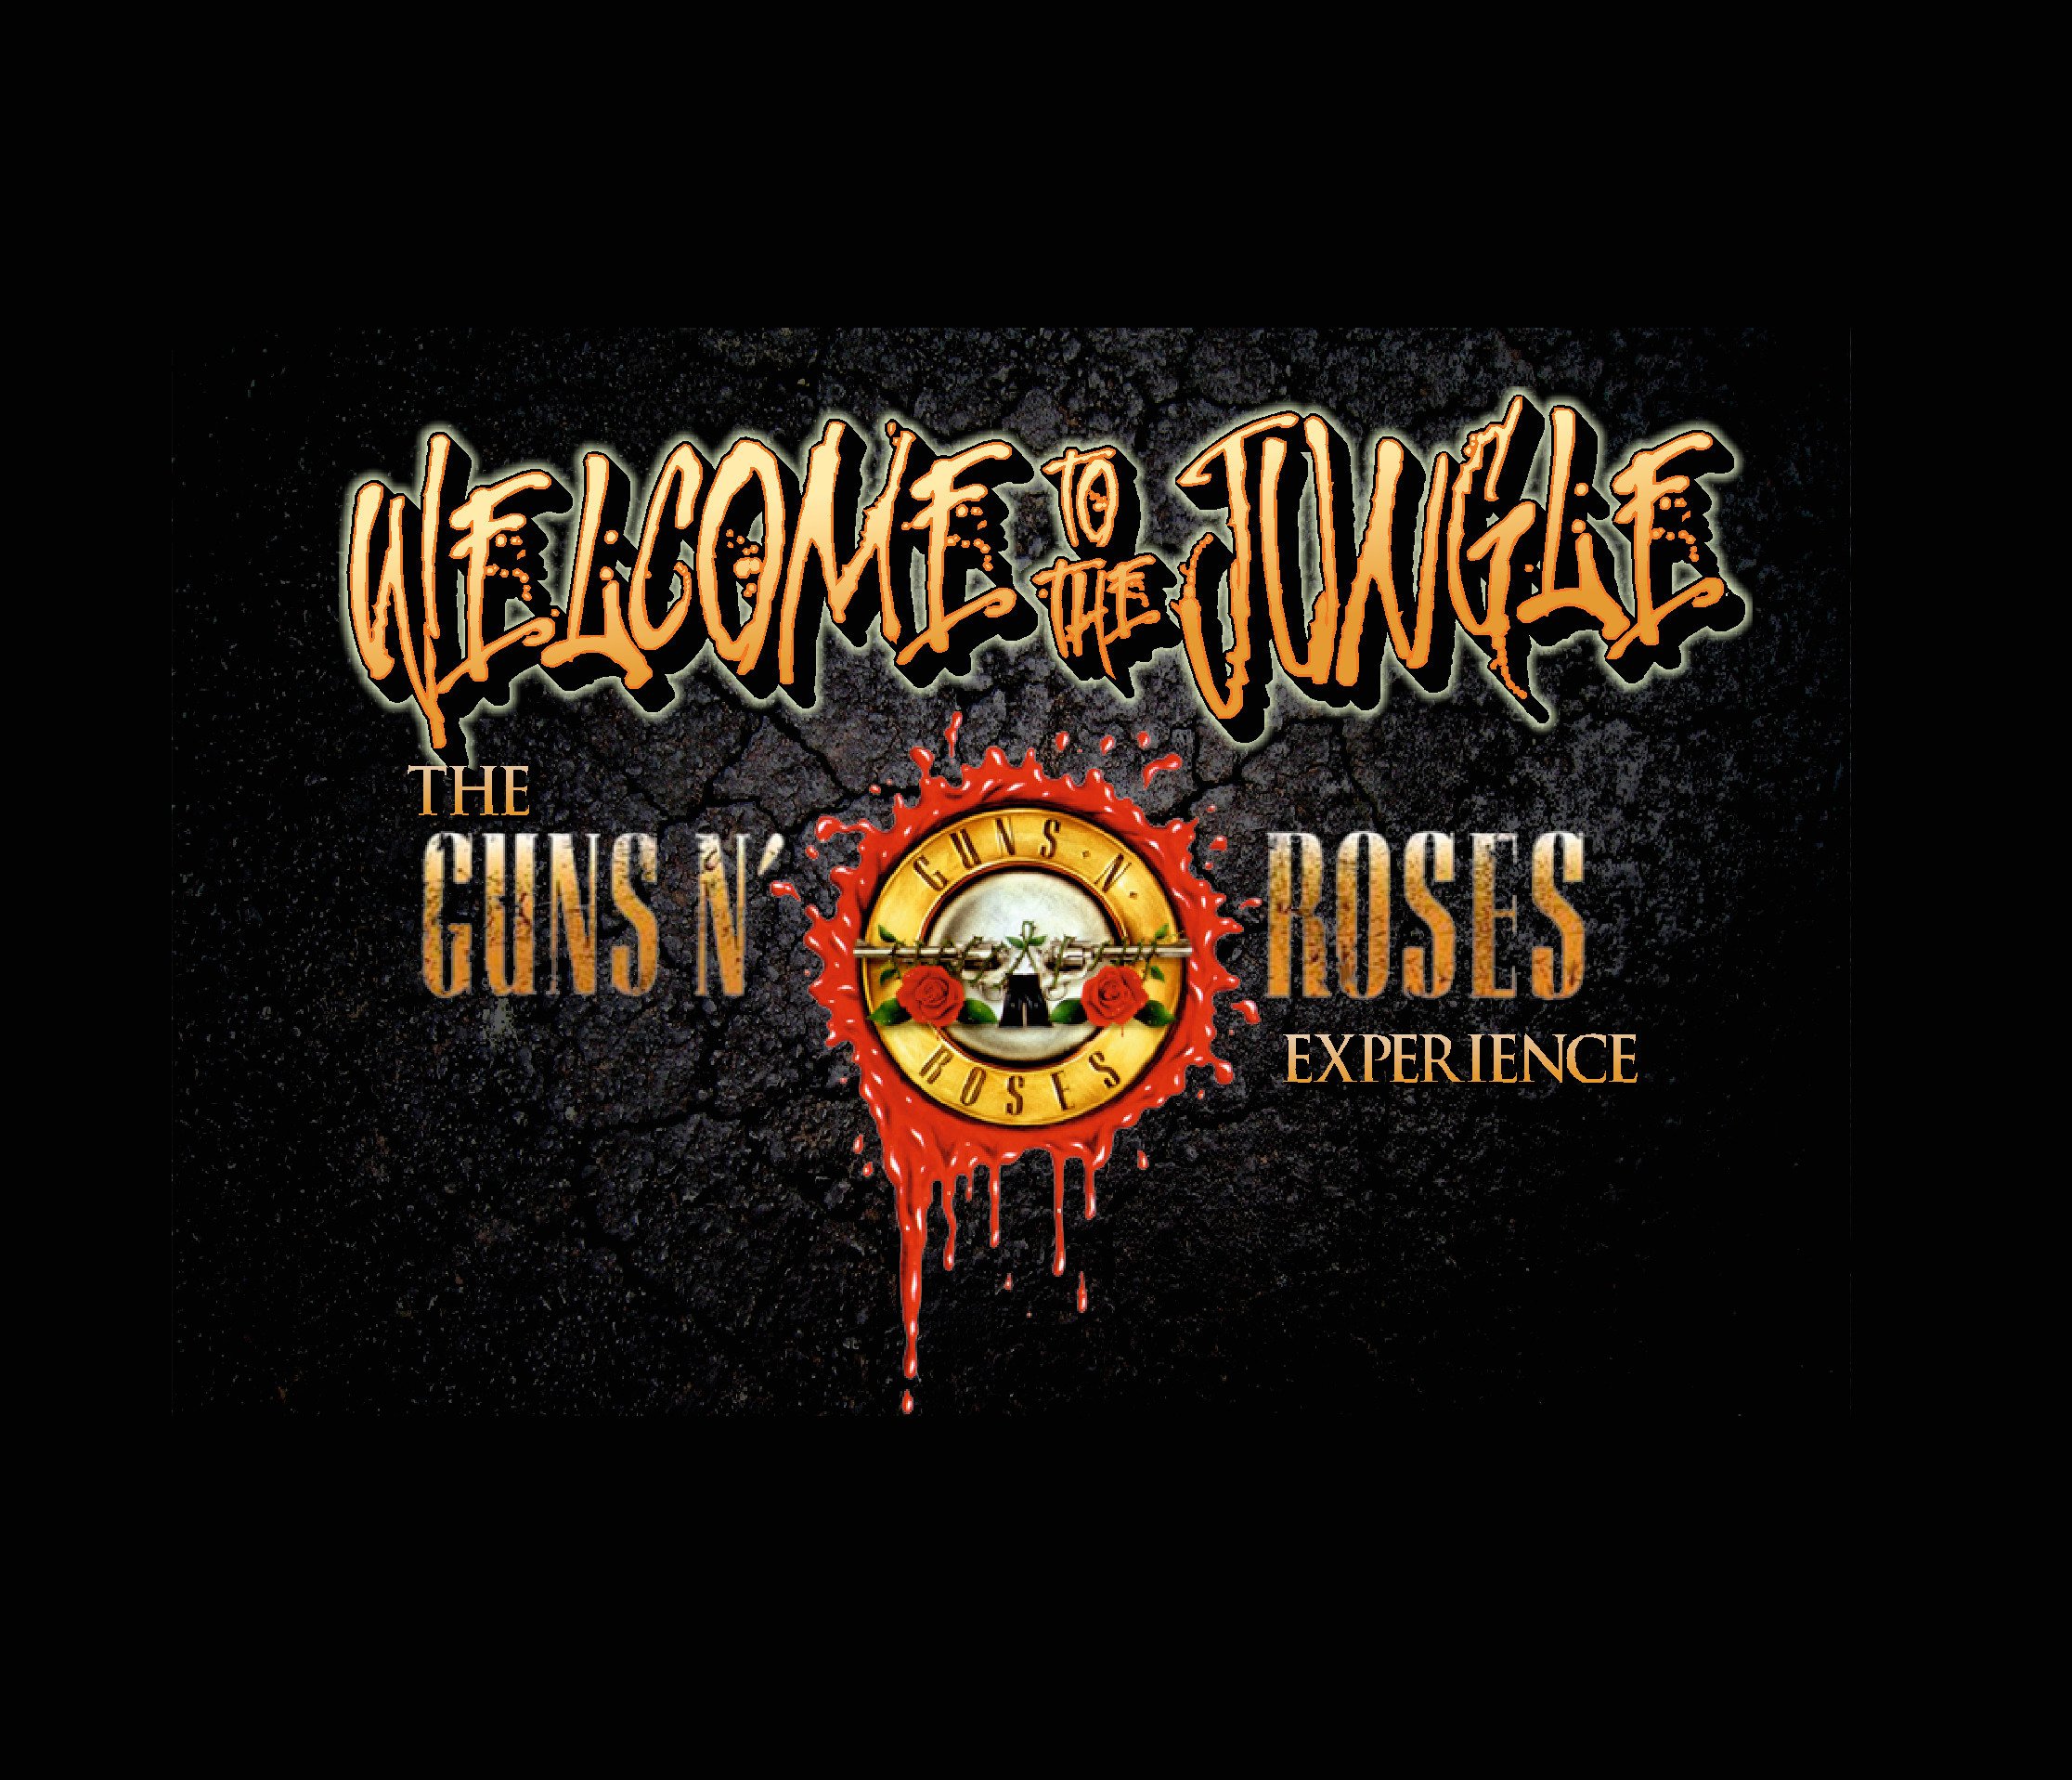 Welcome To The Jungle - Guns N' Roses 